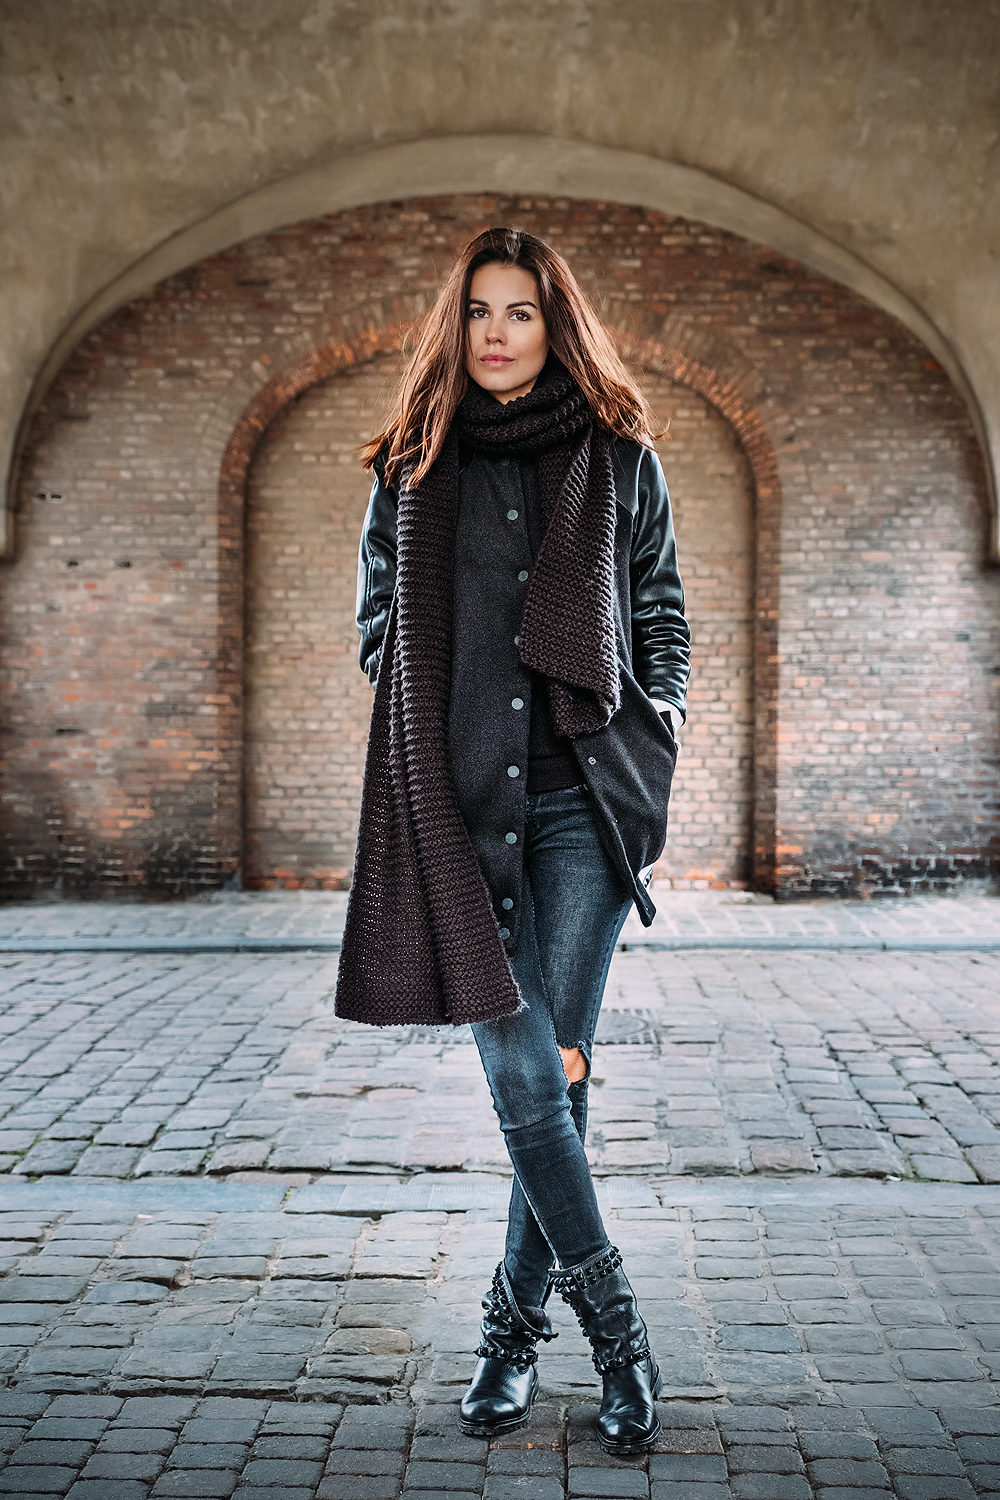 Fujifilm Xpro 2 editorial Urban fashion image in Bruges Belgium by Willie Kers